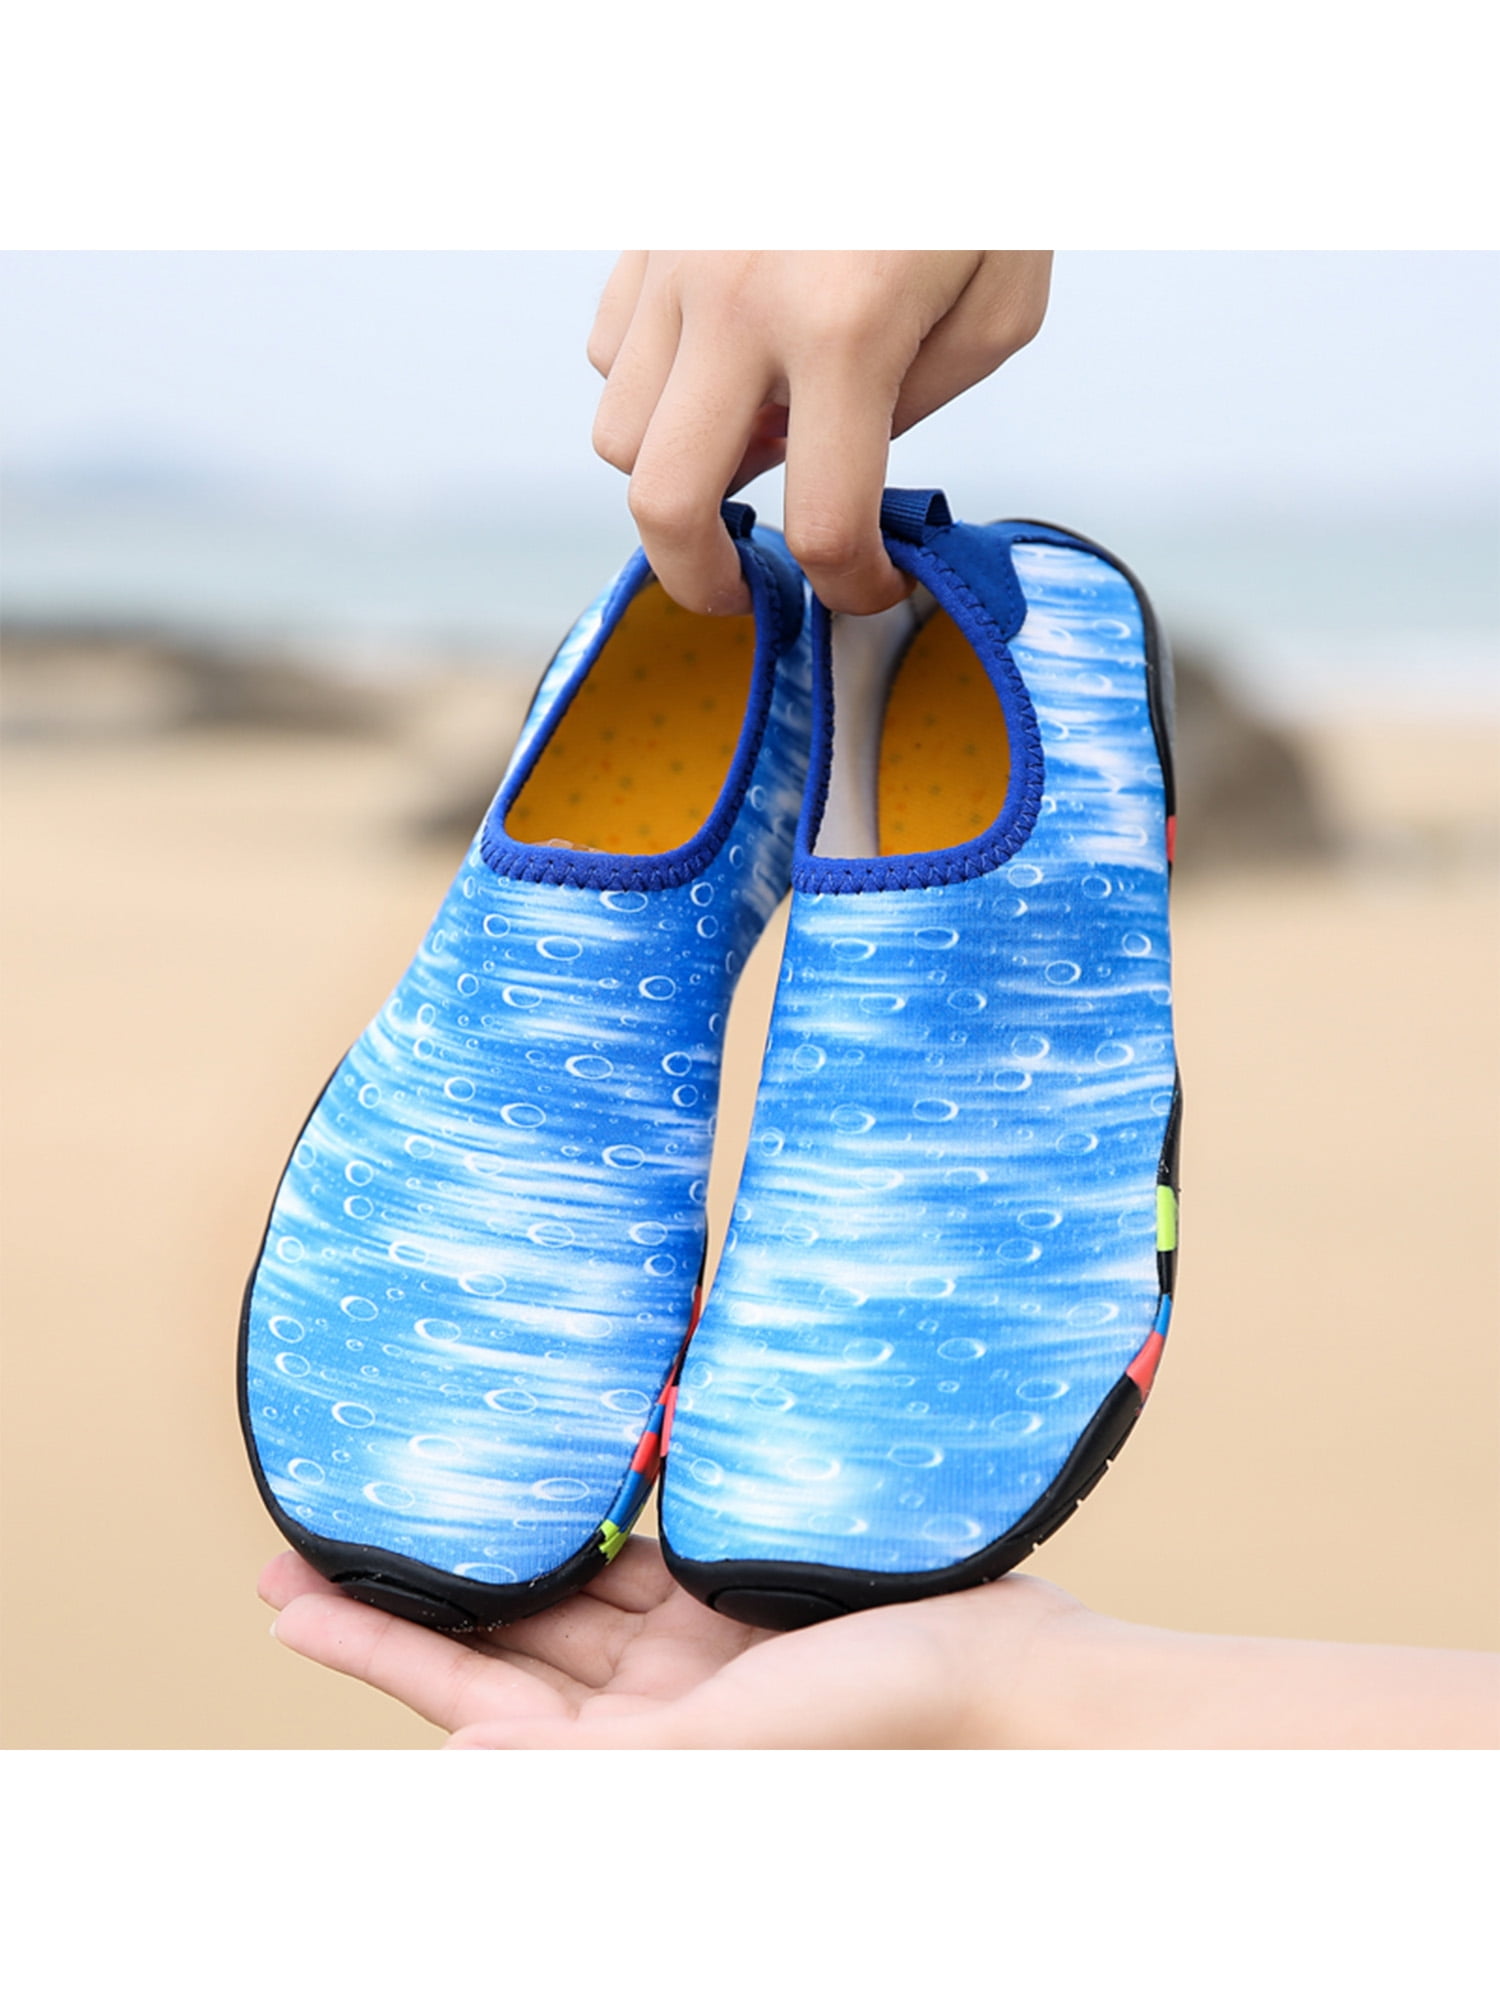 Details about   Aqua Shoes Kid's Water Shoes Quick Drying Socks for Surf Swimming Diving Beach 